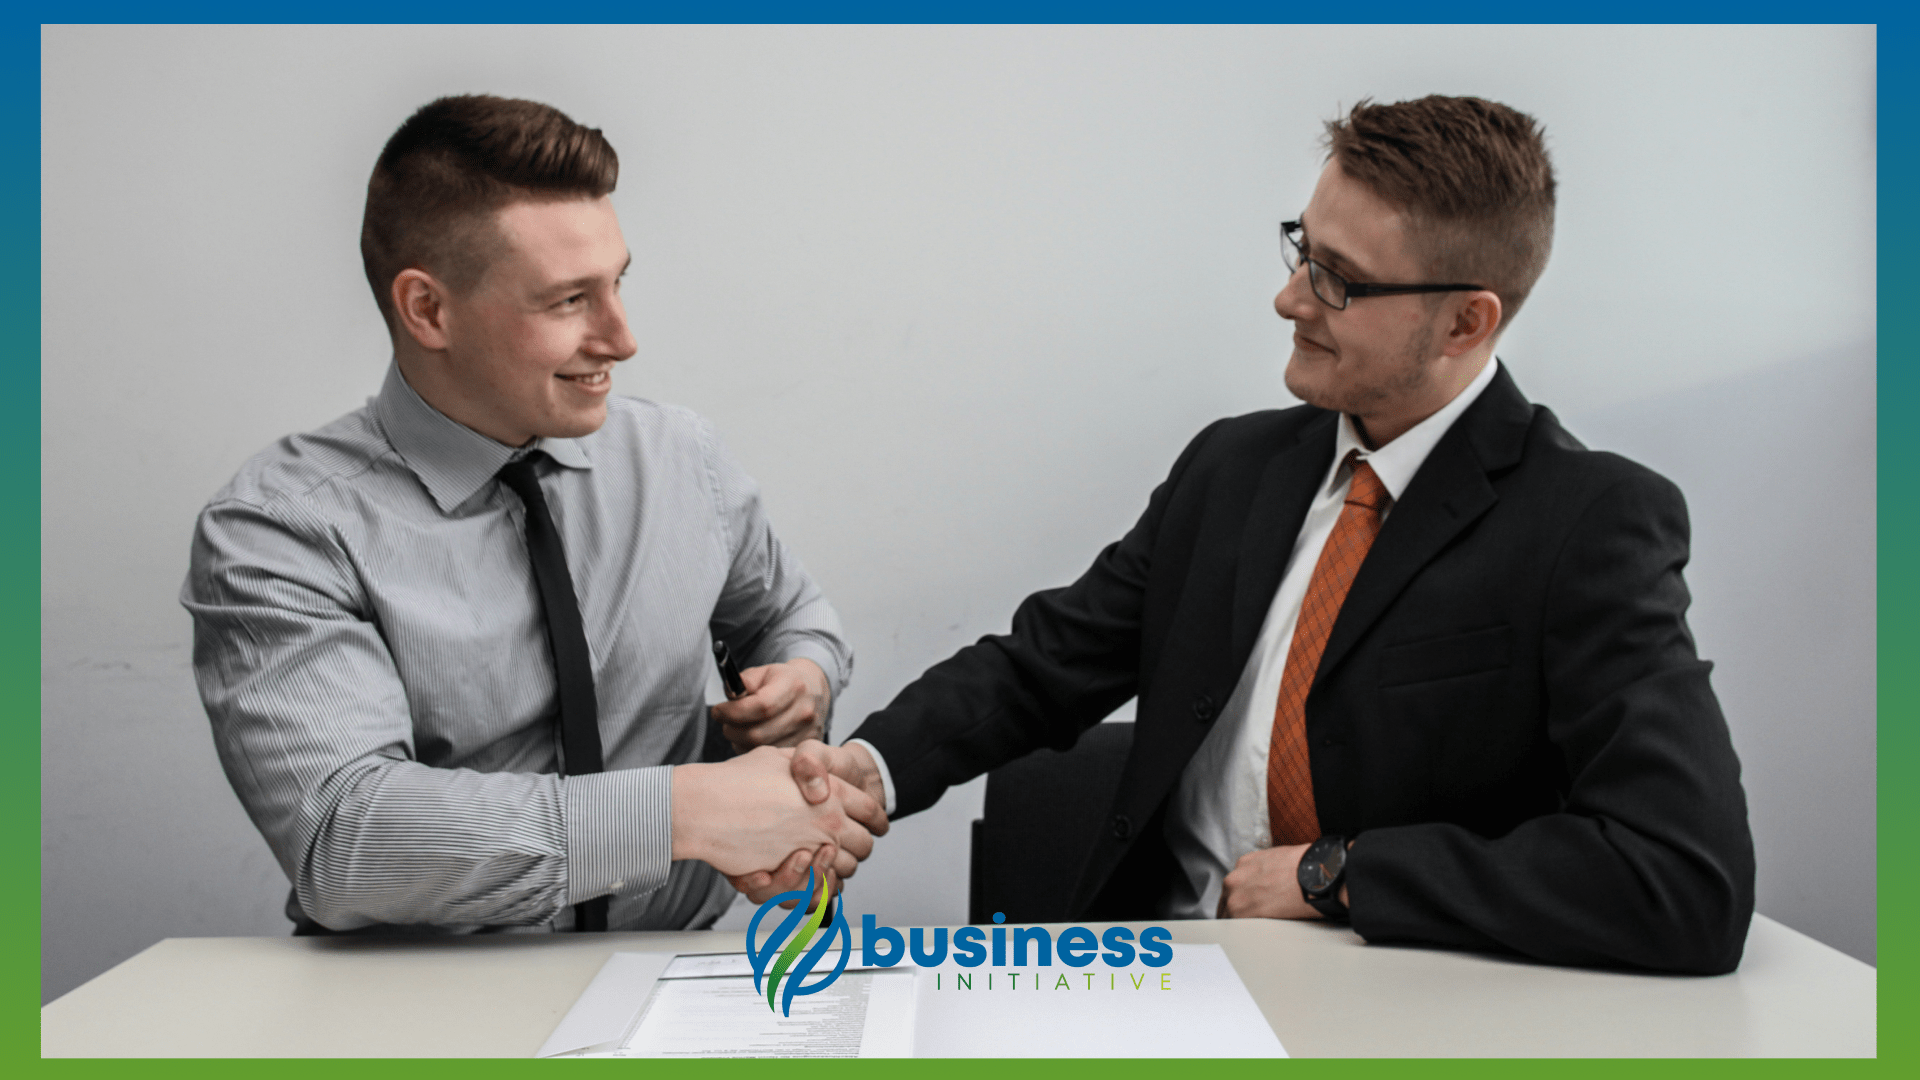 different types of business partnerships